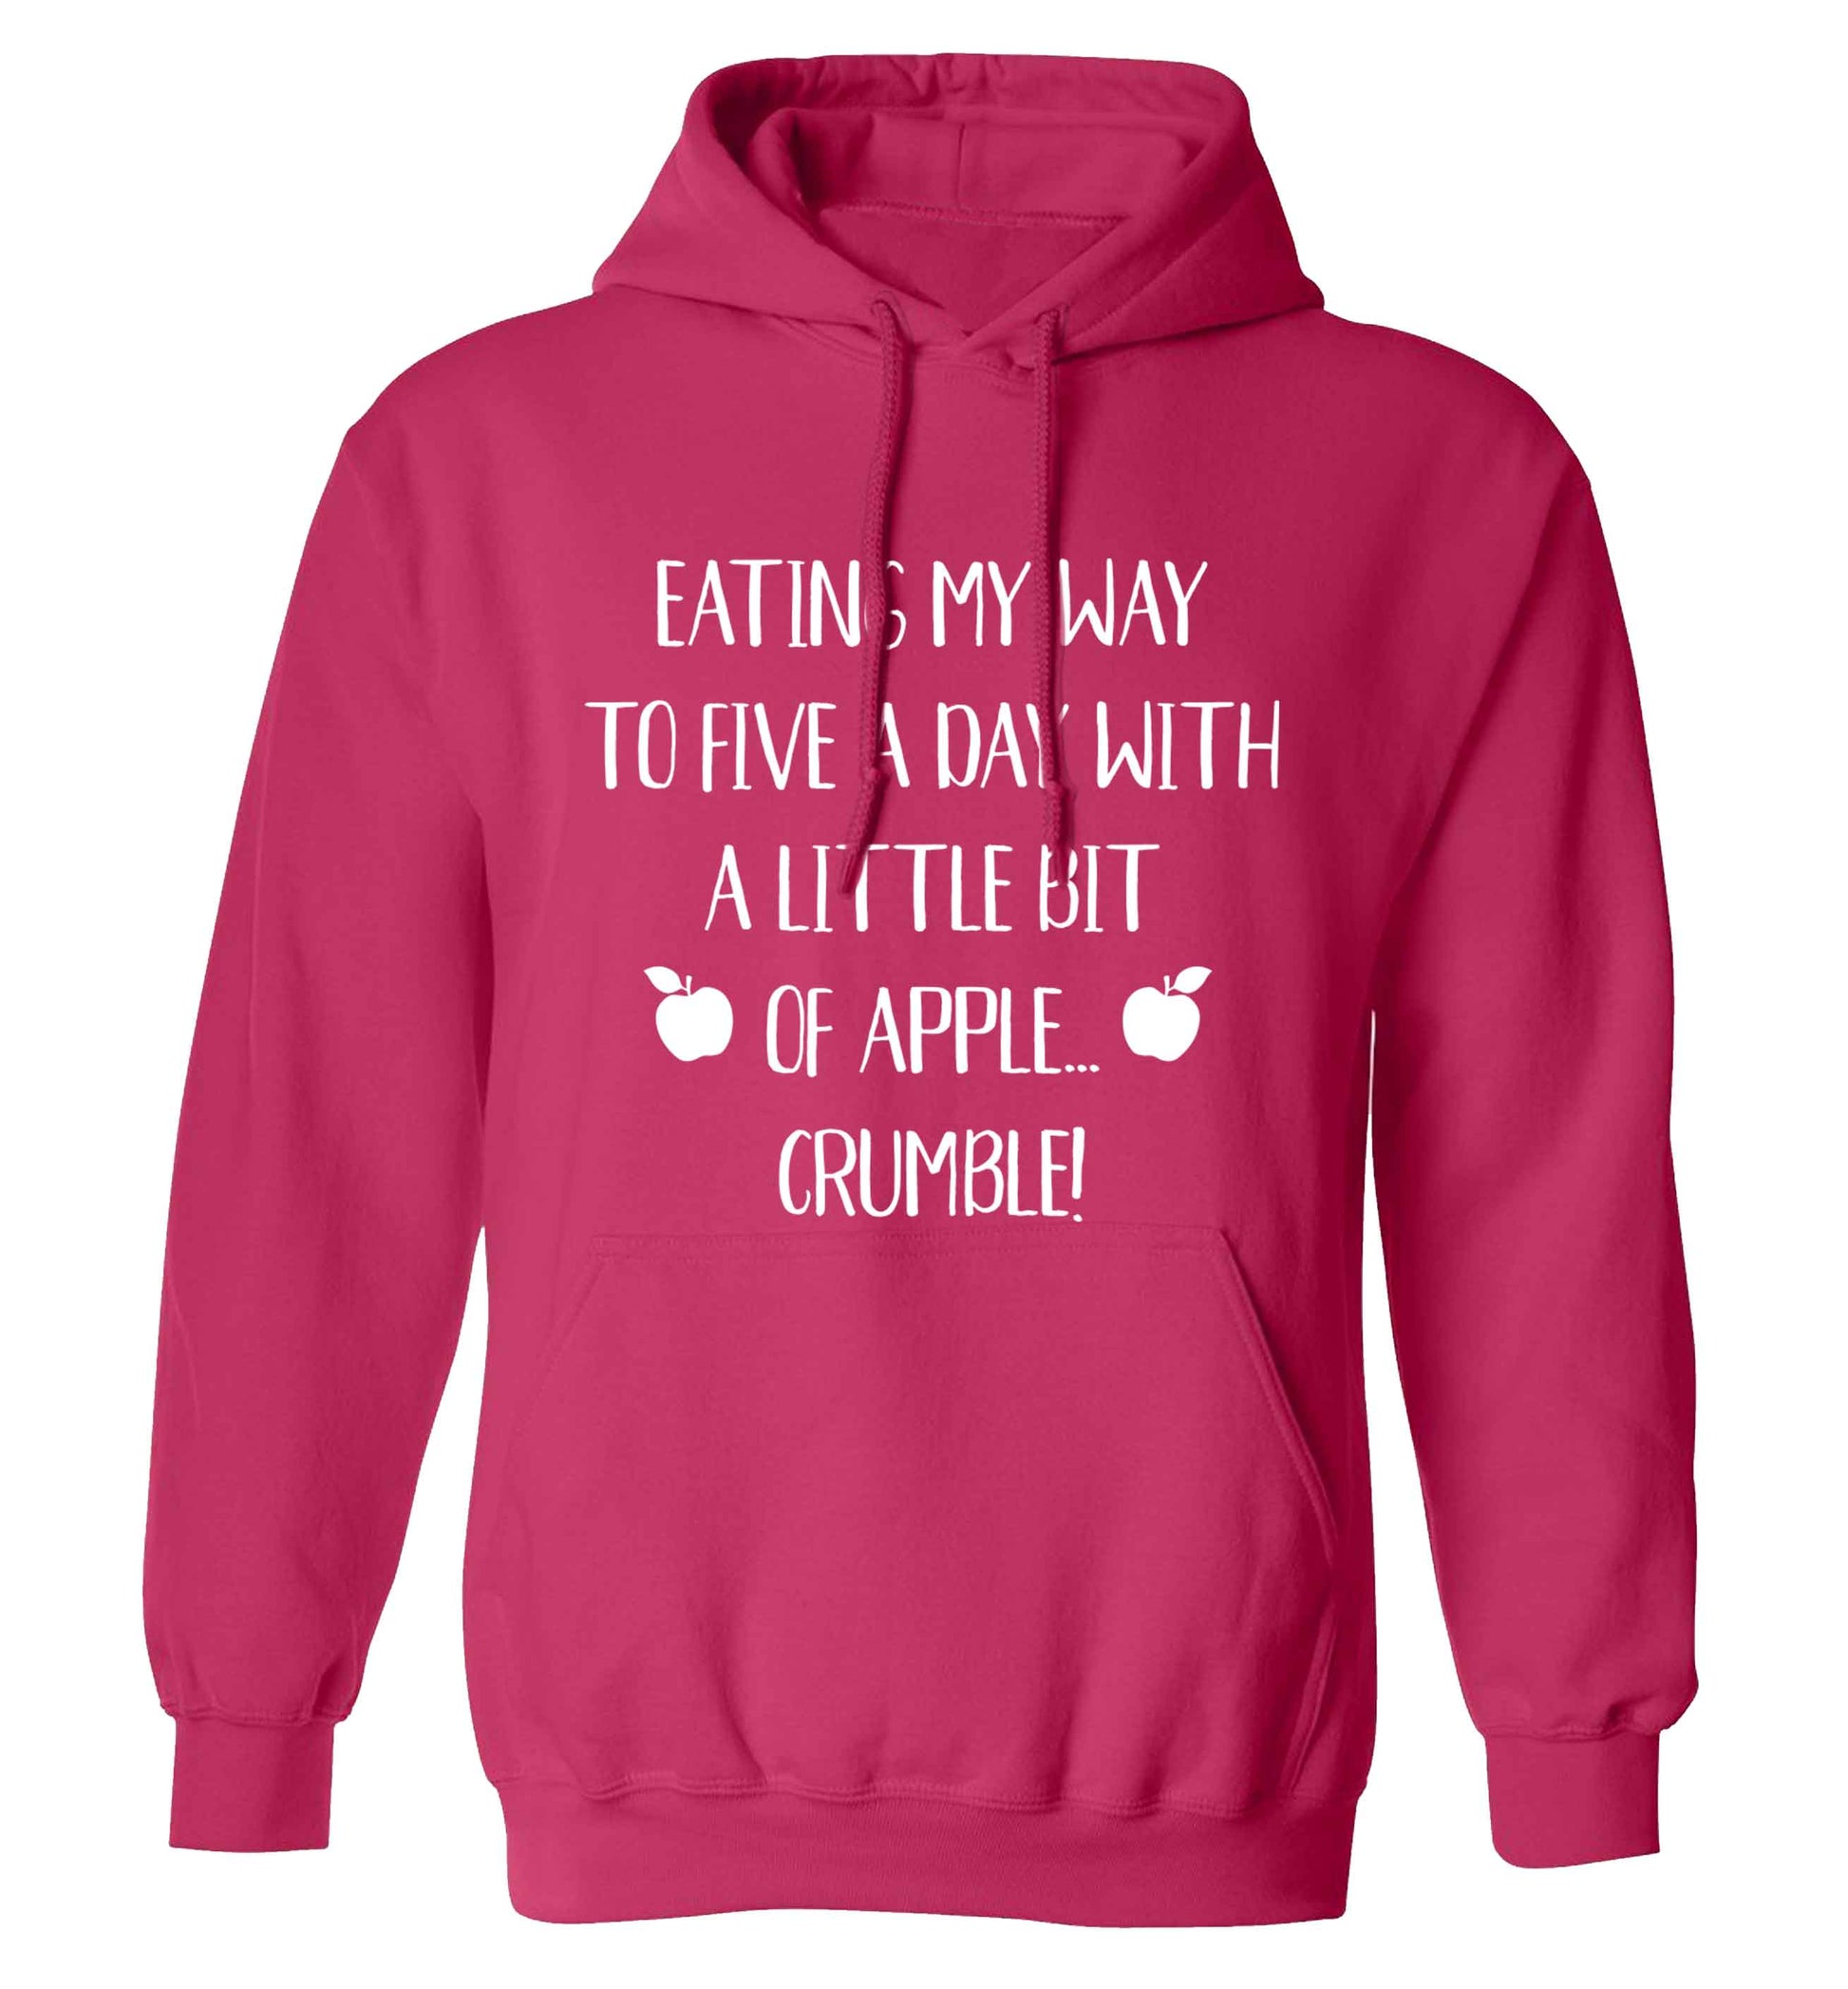 Eating my way to five a day with a little bit of apple crumble adults unisex pink hoodie 2XL